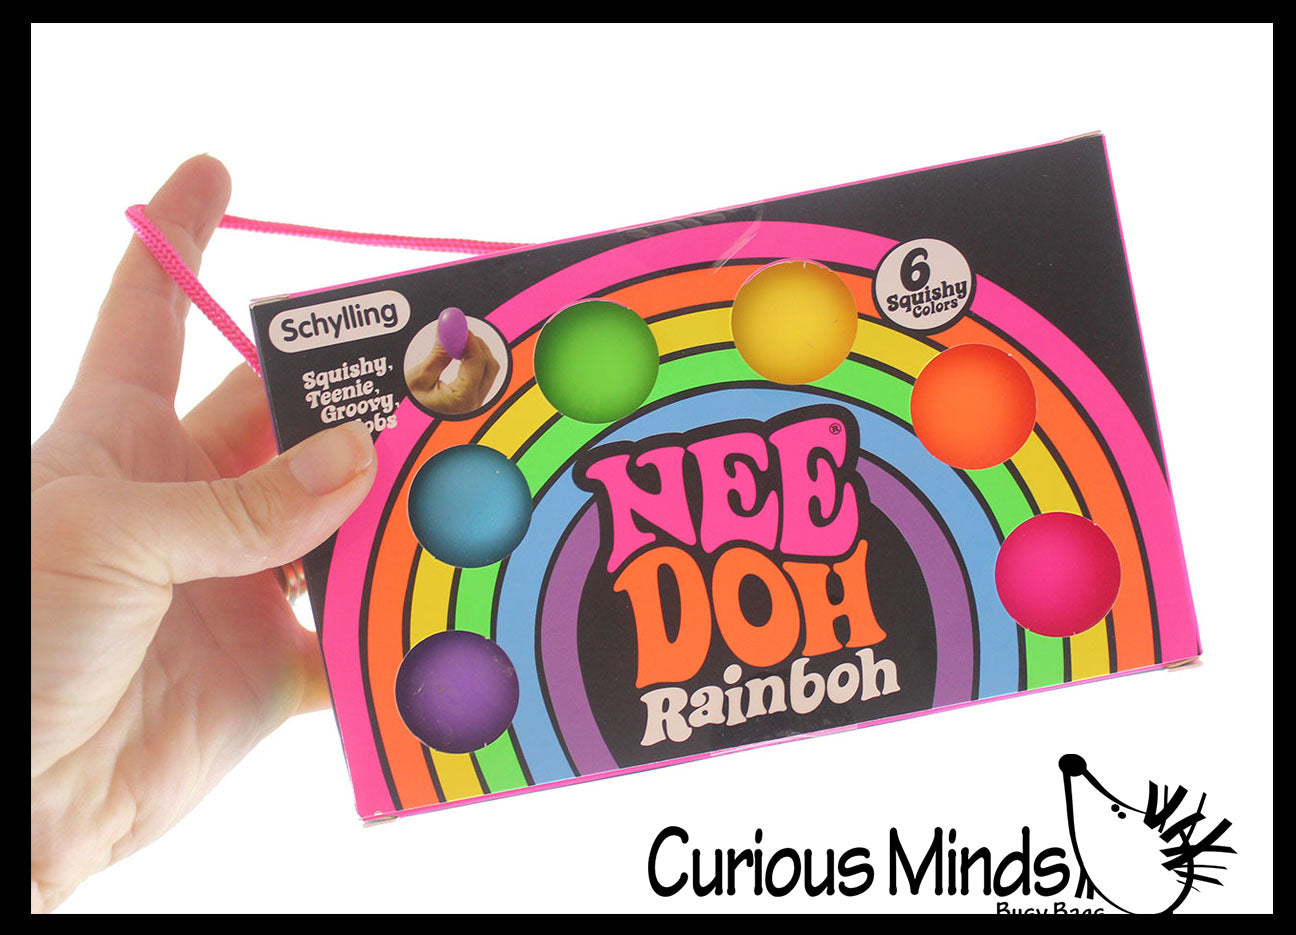 Nee-Doh Rainbow Teenie Tiny Nee-Doh 3 Pack Soft Doh Filled Stretch Ball - Ultra Squishy and Moldable Relaxing Sensory Fidget Stress Toy